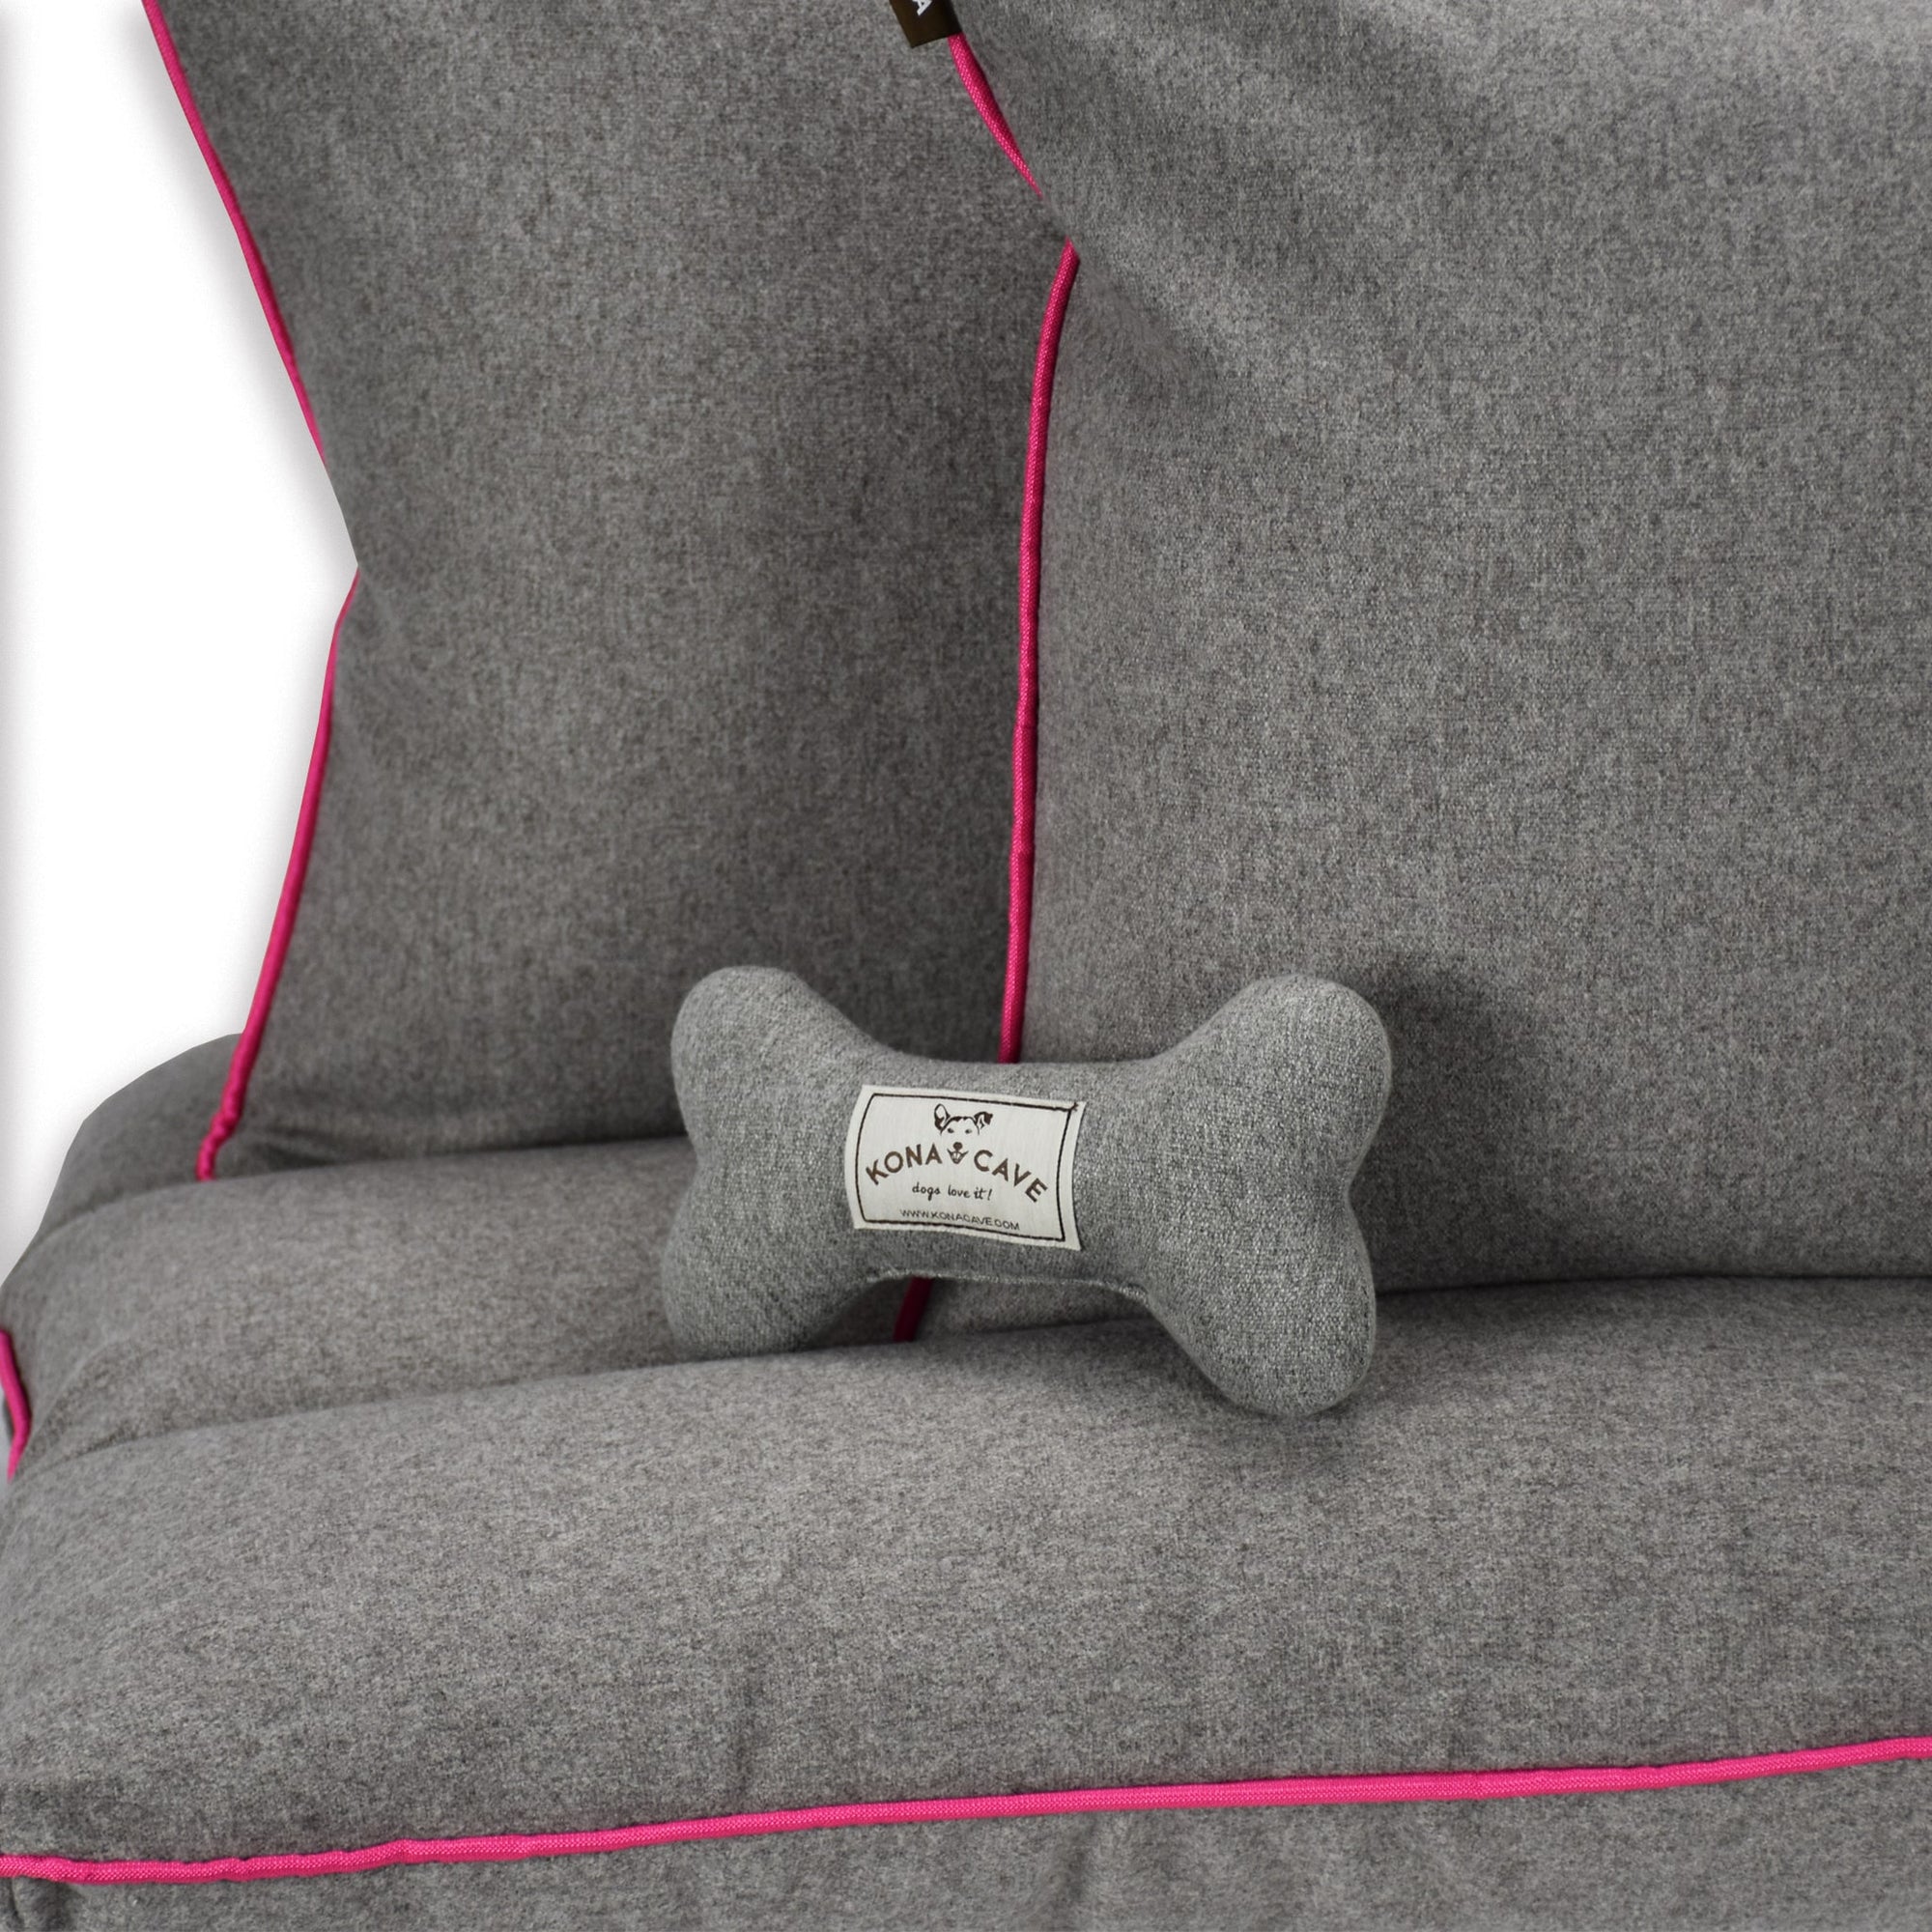 KONA CAVE® Cloud Bed Decor Gift Set.  Grey Flannel dog bed cushion with hot pink trim.  Set in clouds 2 matching pillow covers with hot pink trim and grey flannel toy dog bone.